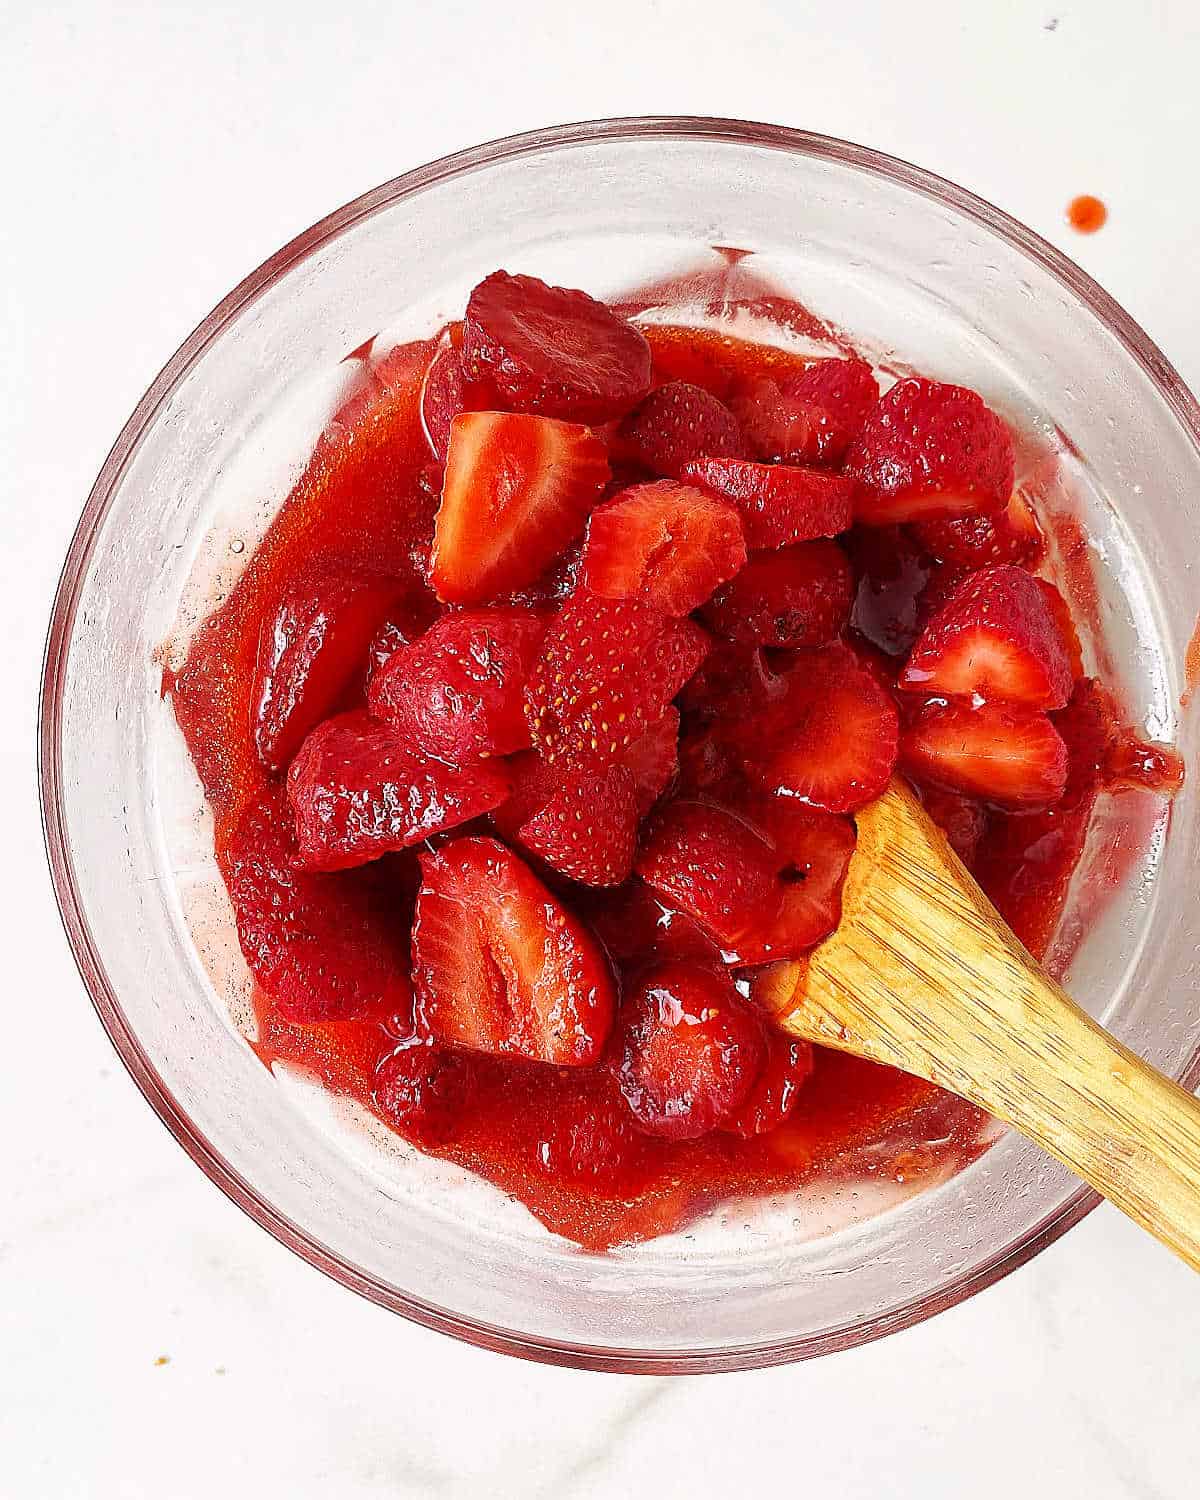 Glass bowl with strawberry sauce and fresh chopped strawberries, a wooden spoon inside, white surface.